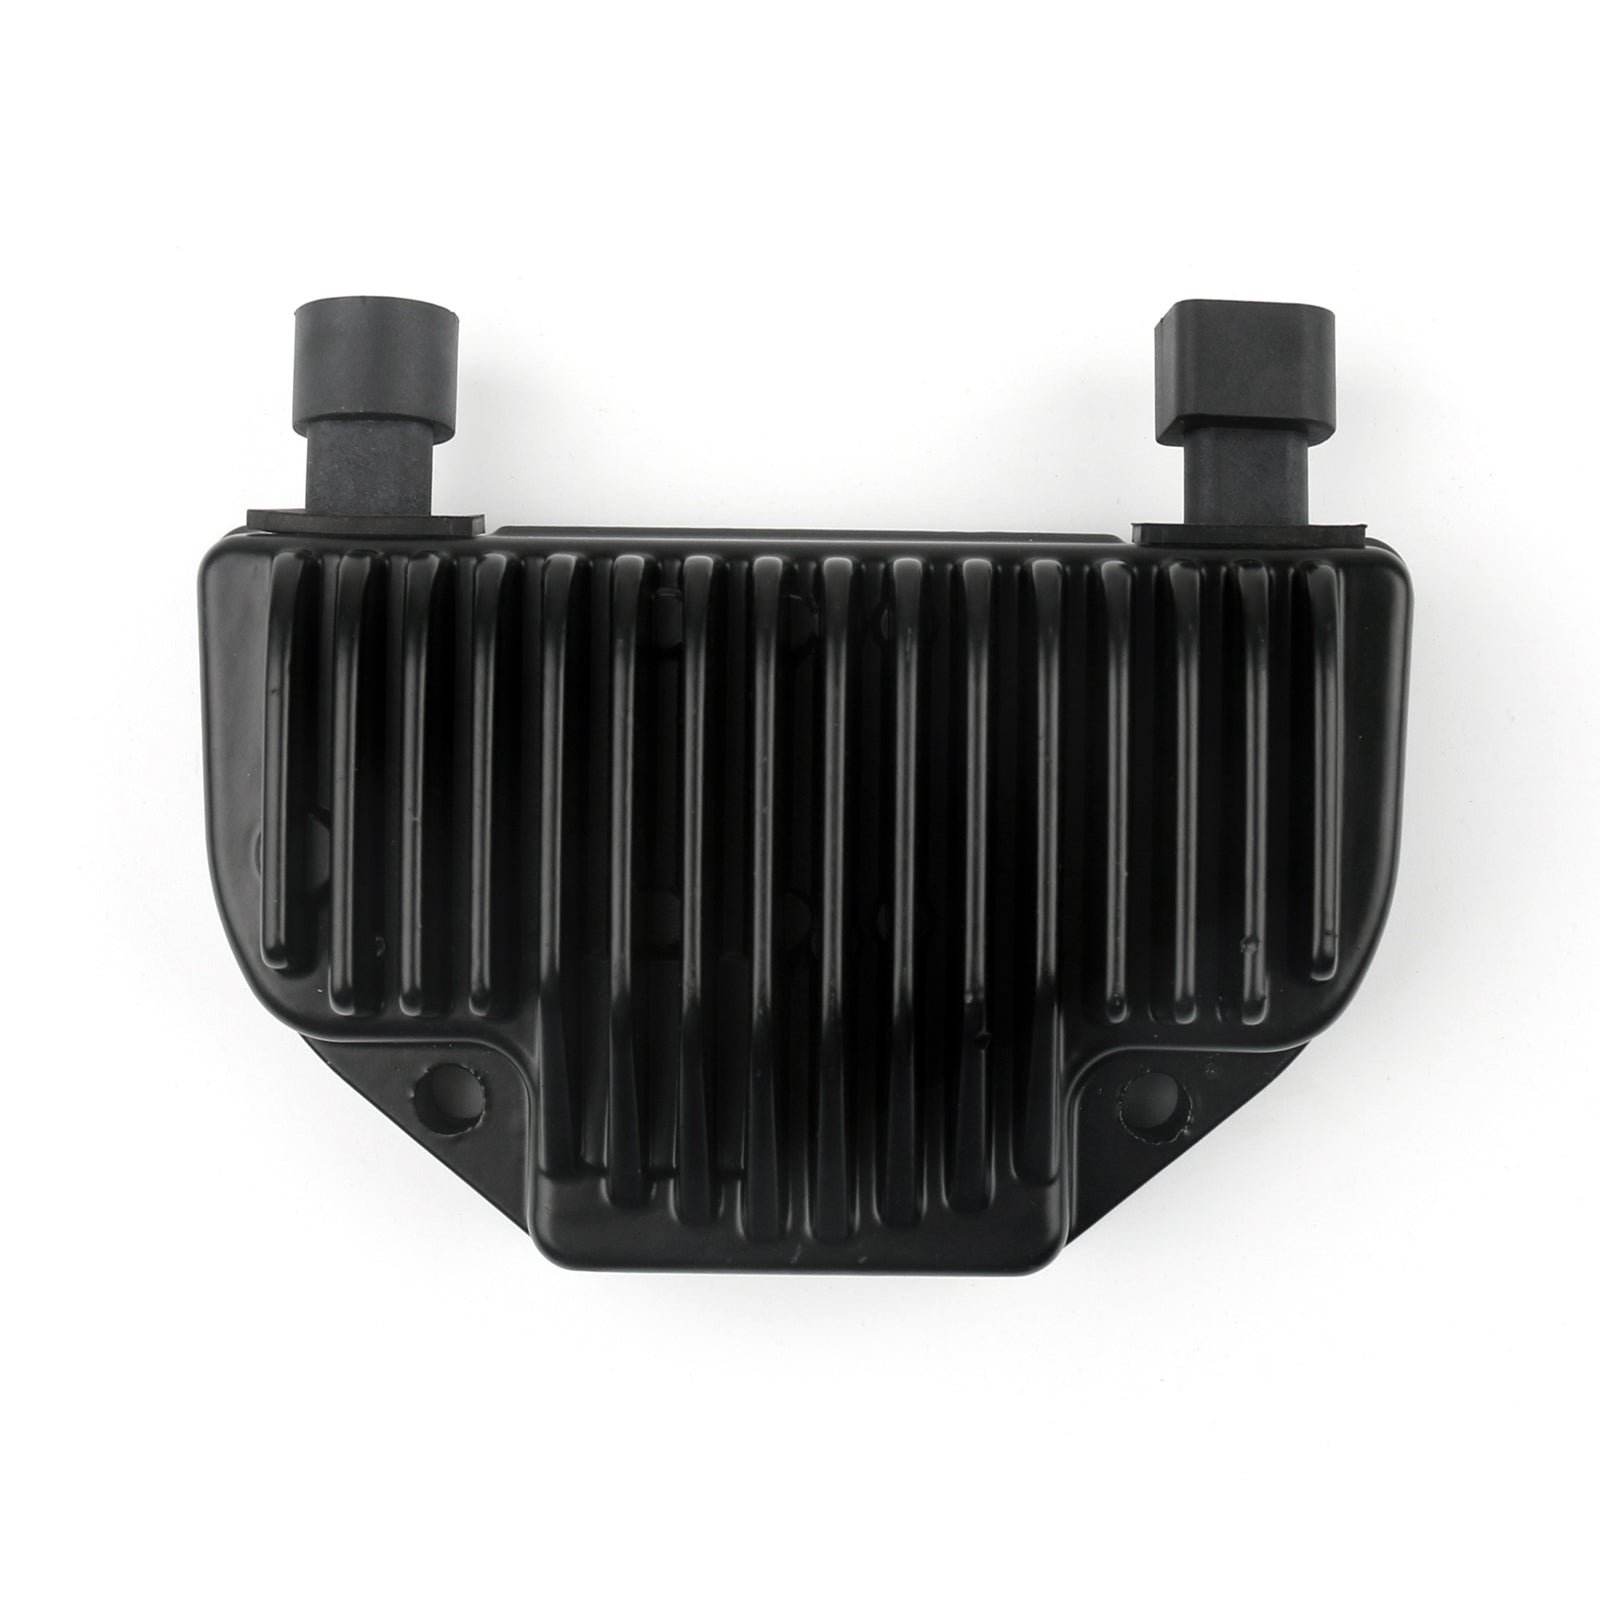 Harley Voltage Regulator Rectifier Fit For Harley FXDWG/Dyna Wide Glide 105th Anniversary 2008 FXDL/Dyna Low Rider 2014